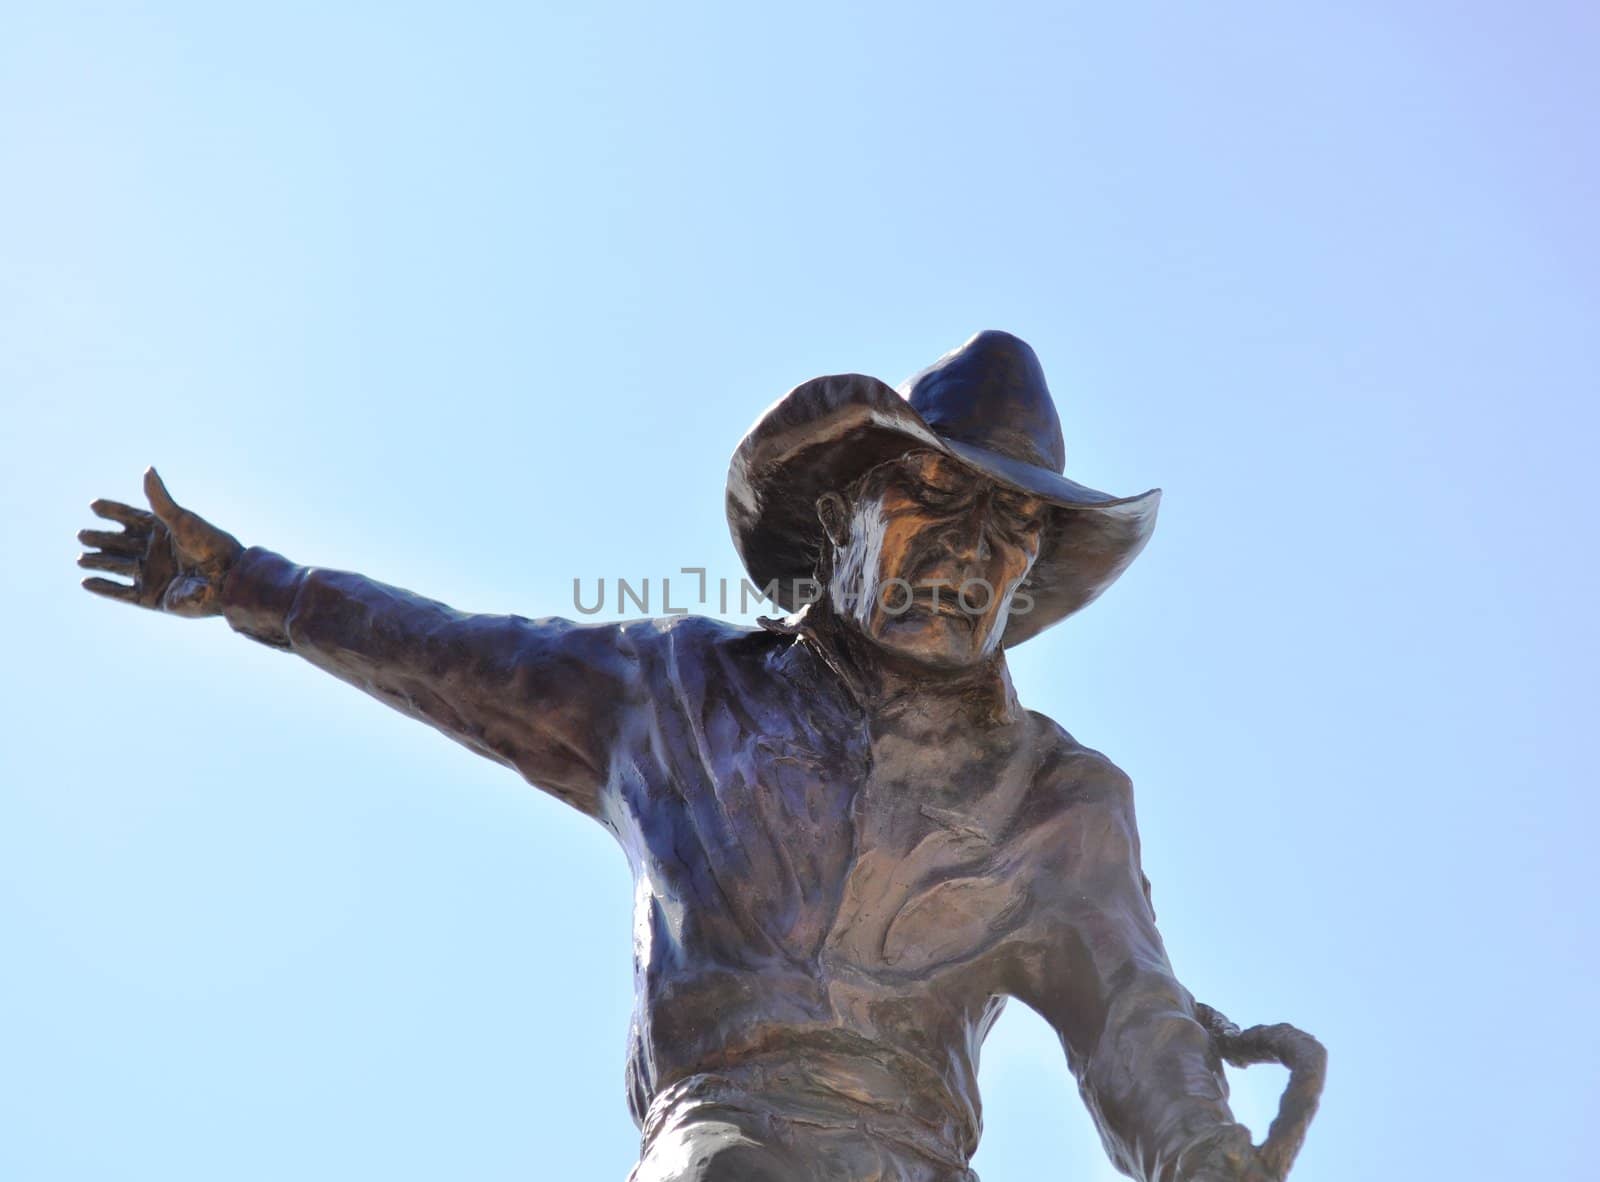 Deadwood rodeo rider statue by RefocusPhoto